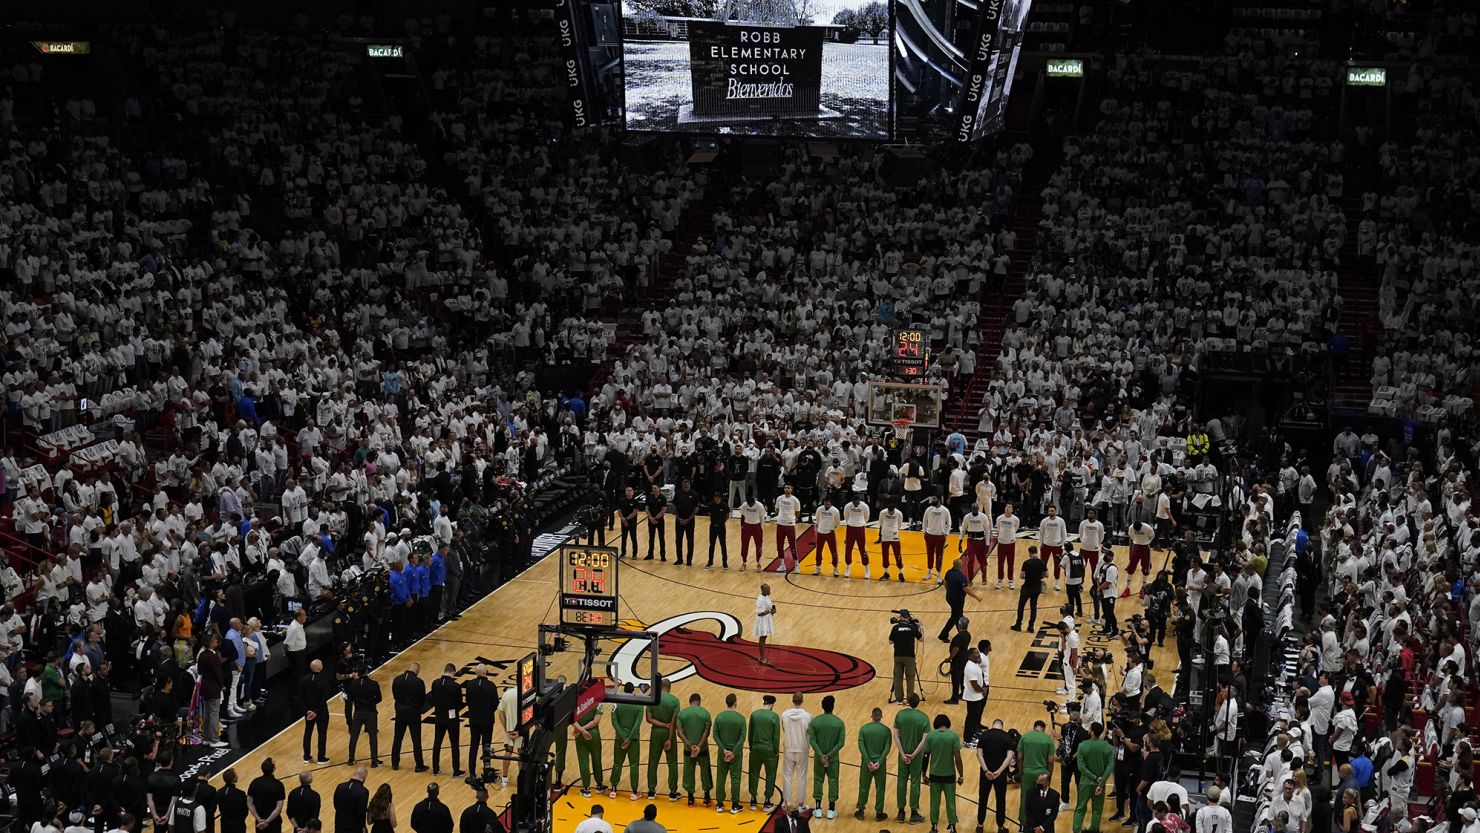 A moment of silence for those killed at the Robb Elementary School massacre in Uvalde was held before Game 5 of the Eastern Conference Finals playoff series.